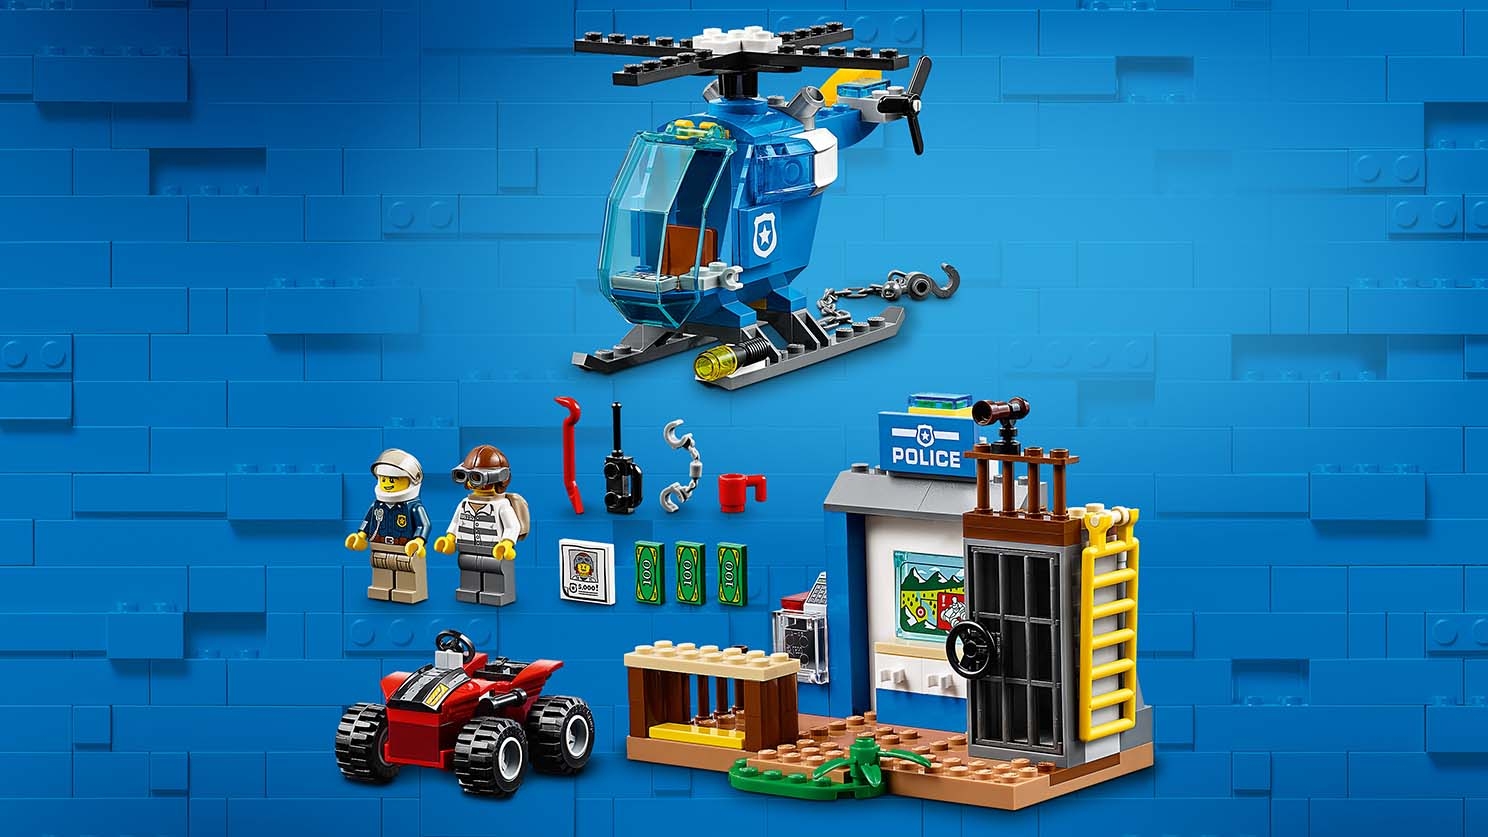 Decrement bred Risikabel Mountain Police Chase 10751 - LEGO® City Sets - LEGO.com for kids